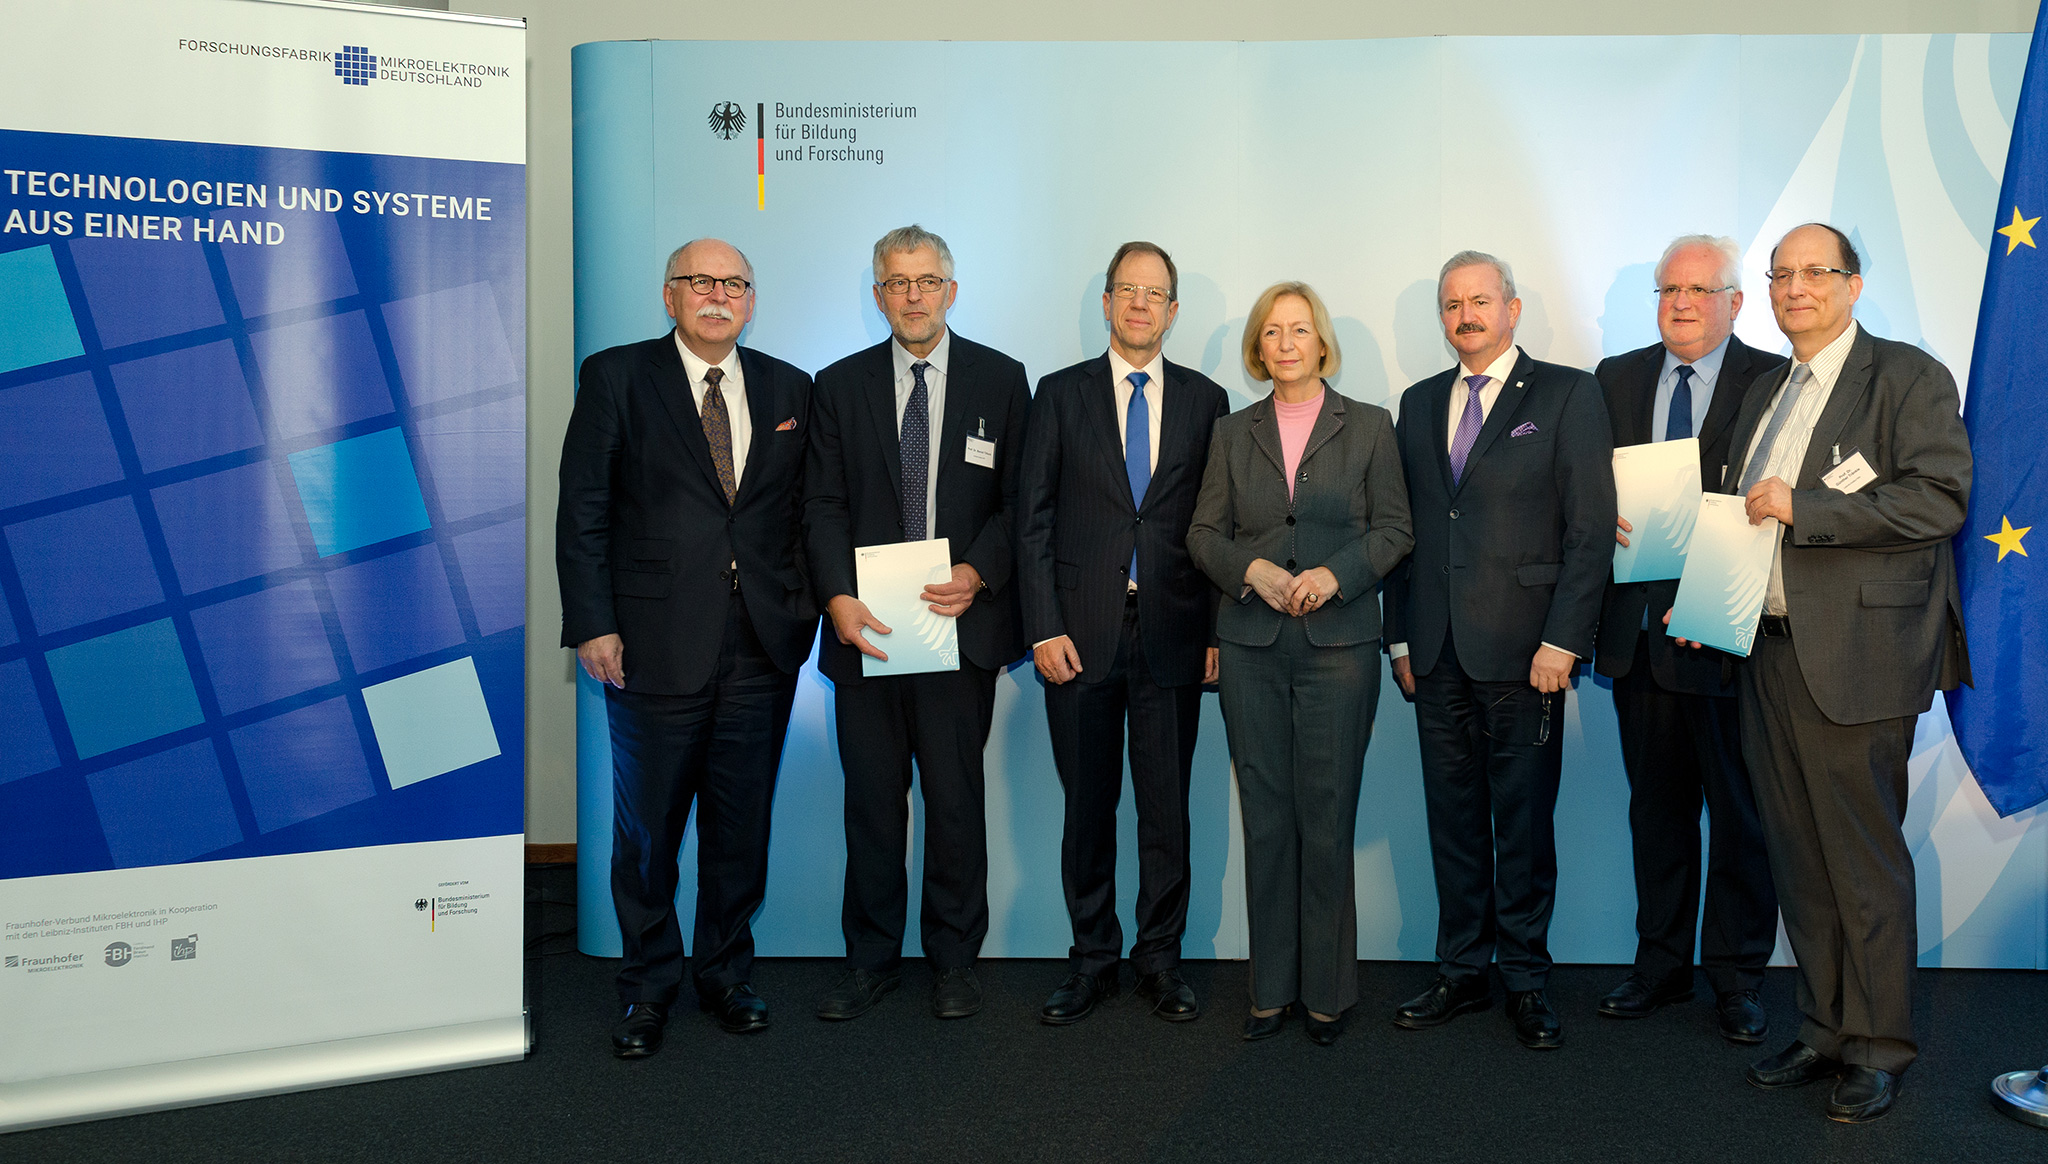 From left to right: Prof. Matthias Kleiner, President of the Leibniz Association, Prof. Bernd Tillack, Director of the Leibniz Institute for Innovative Microelectronics (IHP), Dr. Reinhard Ploss, Chairman of Infineon AG, Prof. Johanna Wanka, Federal Minister for Education and Research, Prof. Reimund Neugebauer, President of the Fraunhofer-Gesellschaft, Prof. Hubert Lakner, Chairman of the Fraunhofer Group for Microelectronics, Prof. Günther Tränkle, Director of the Ferdinand Braun Institute, Leibniz Institute for Maximum-frequency Technology (FBH).